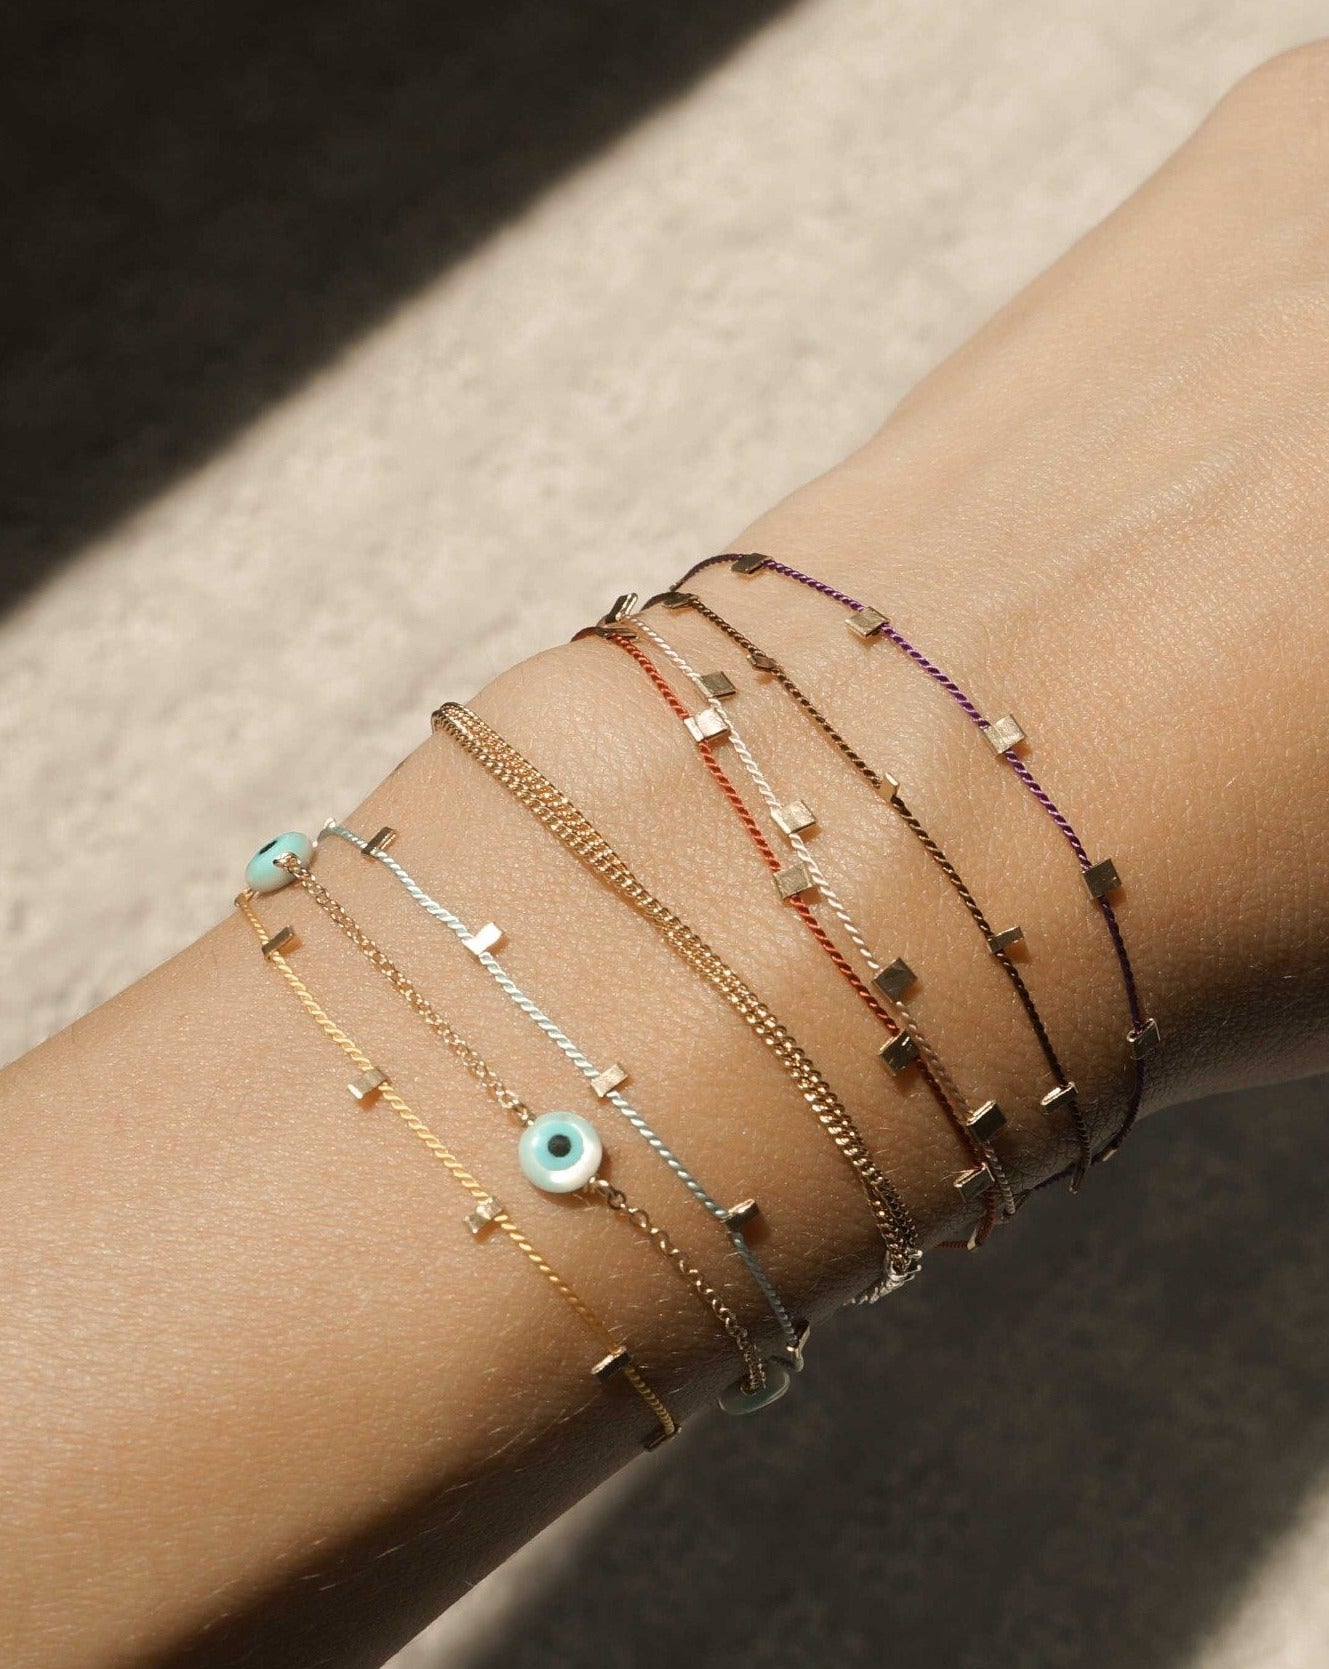 Ojitos Bracelet by KOZAKH. A 6 to 7 inch adjustable length bracelet, crafted in 14K Gold Filled, featuring hand carved Mother of Pearl Evil Eye charms. 